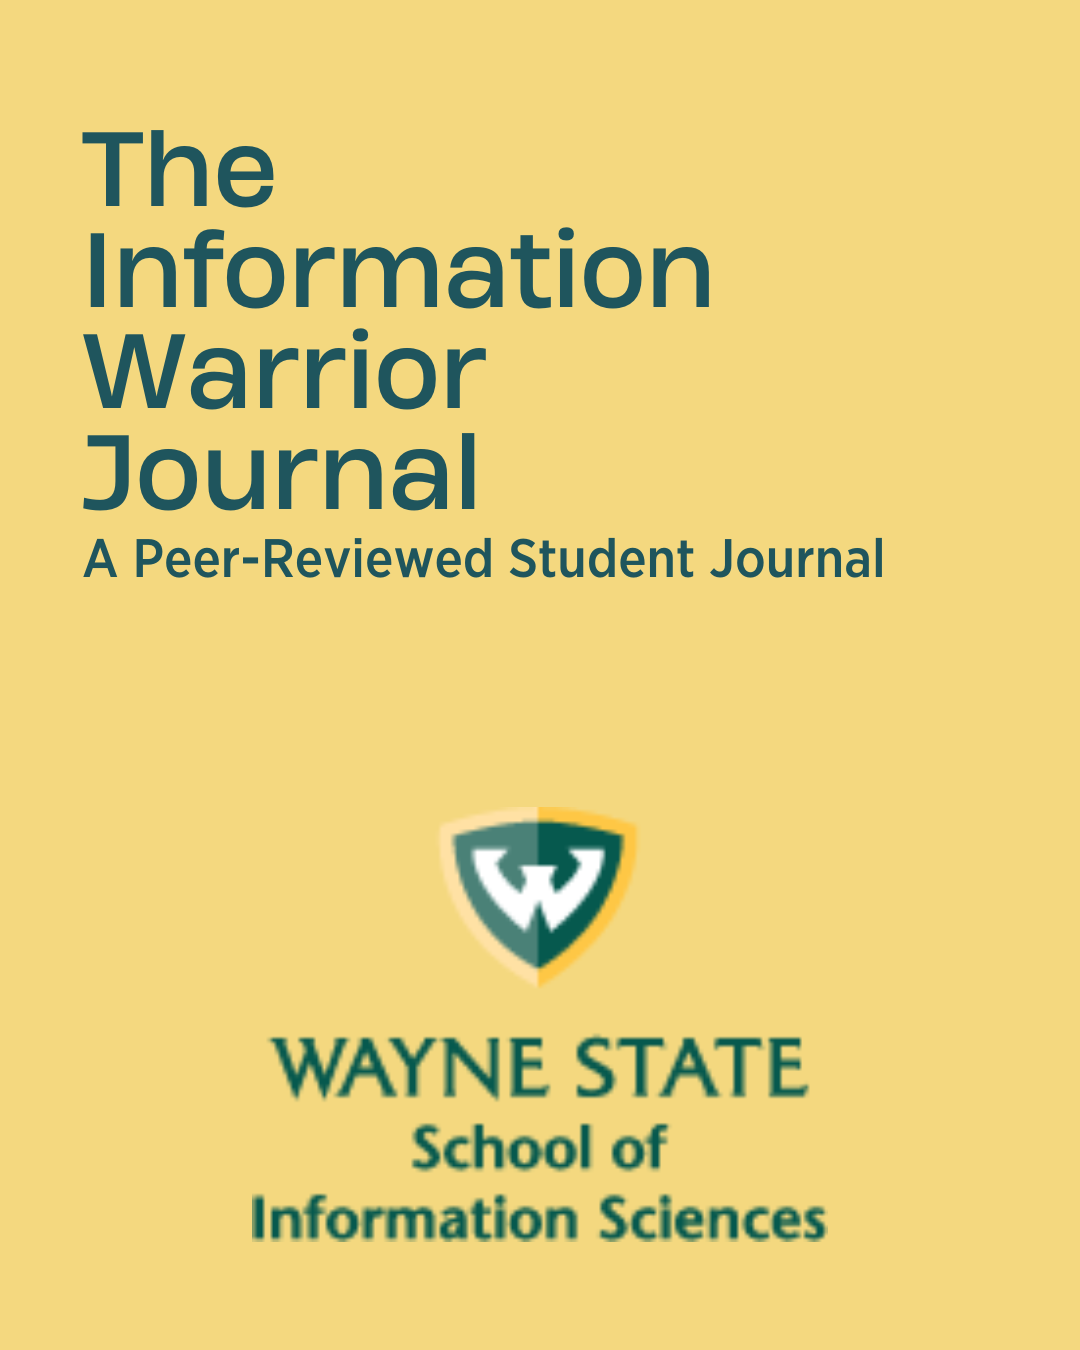 Graphic saying The Information Warrior Journal with a SIS logo